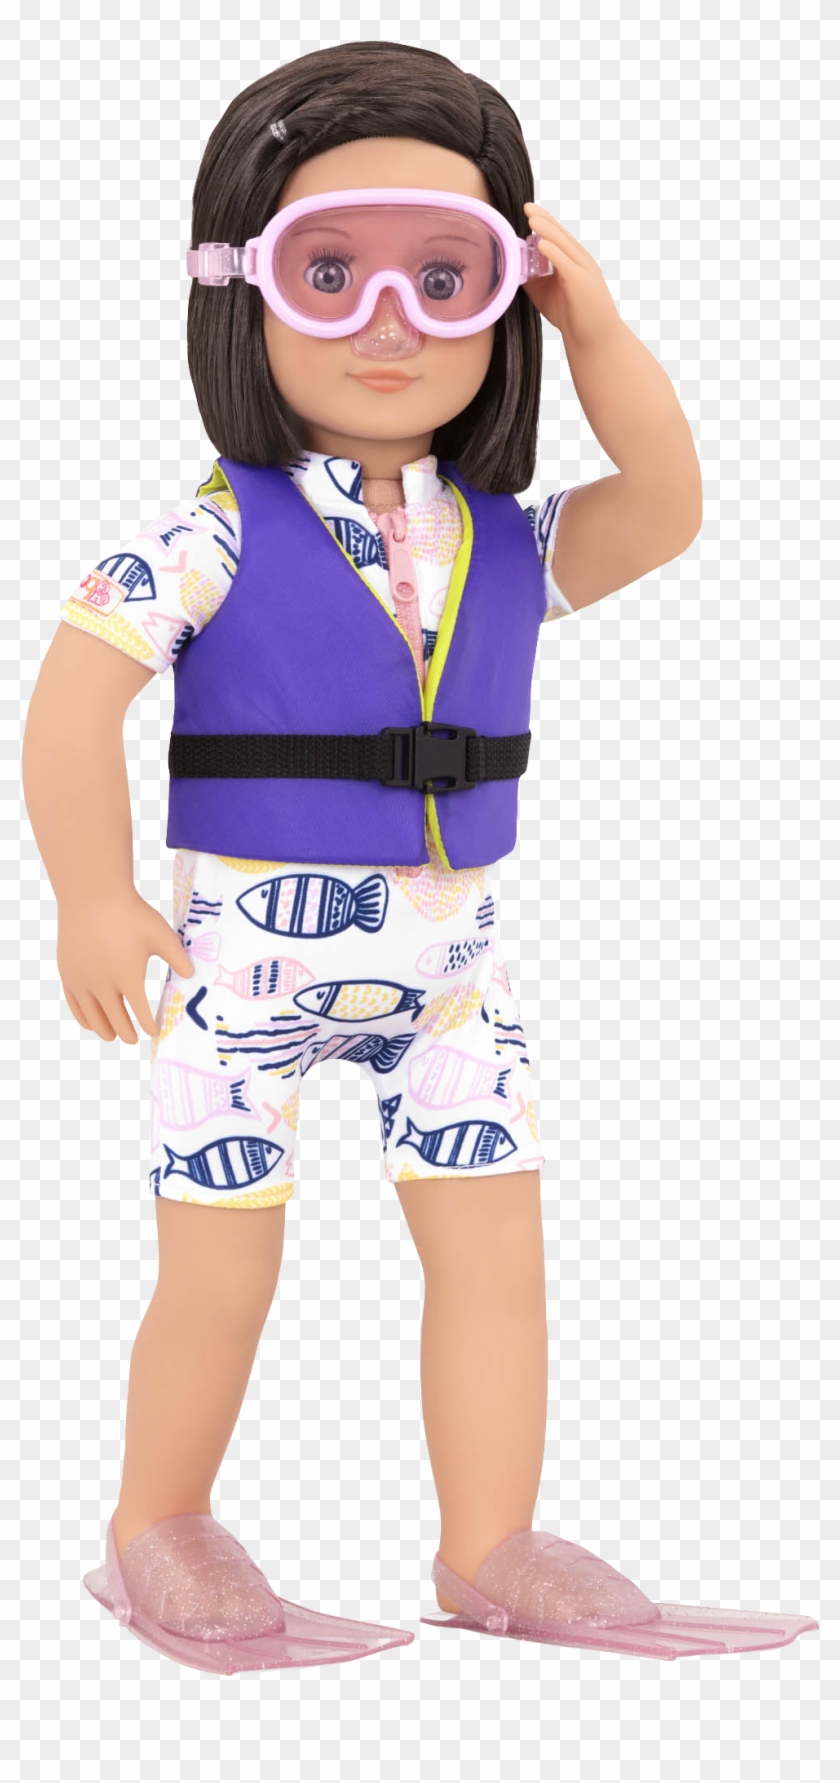 Everly Wearing Mask, Swimsuit, And Life Vest - Girl Clipart #3836356